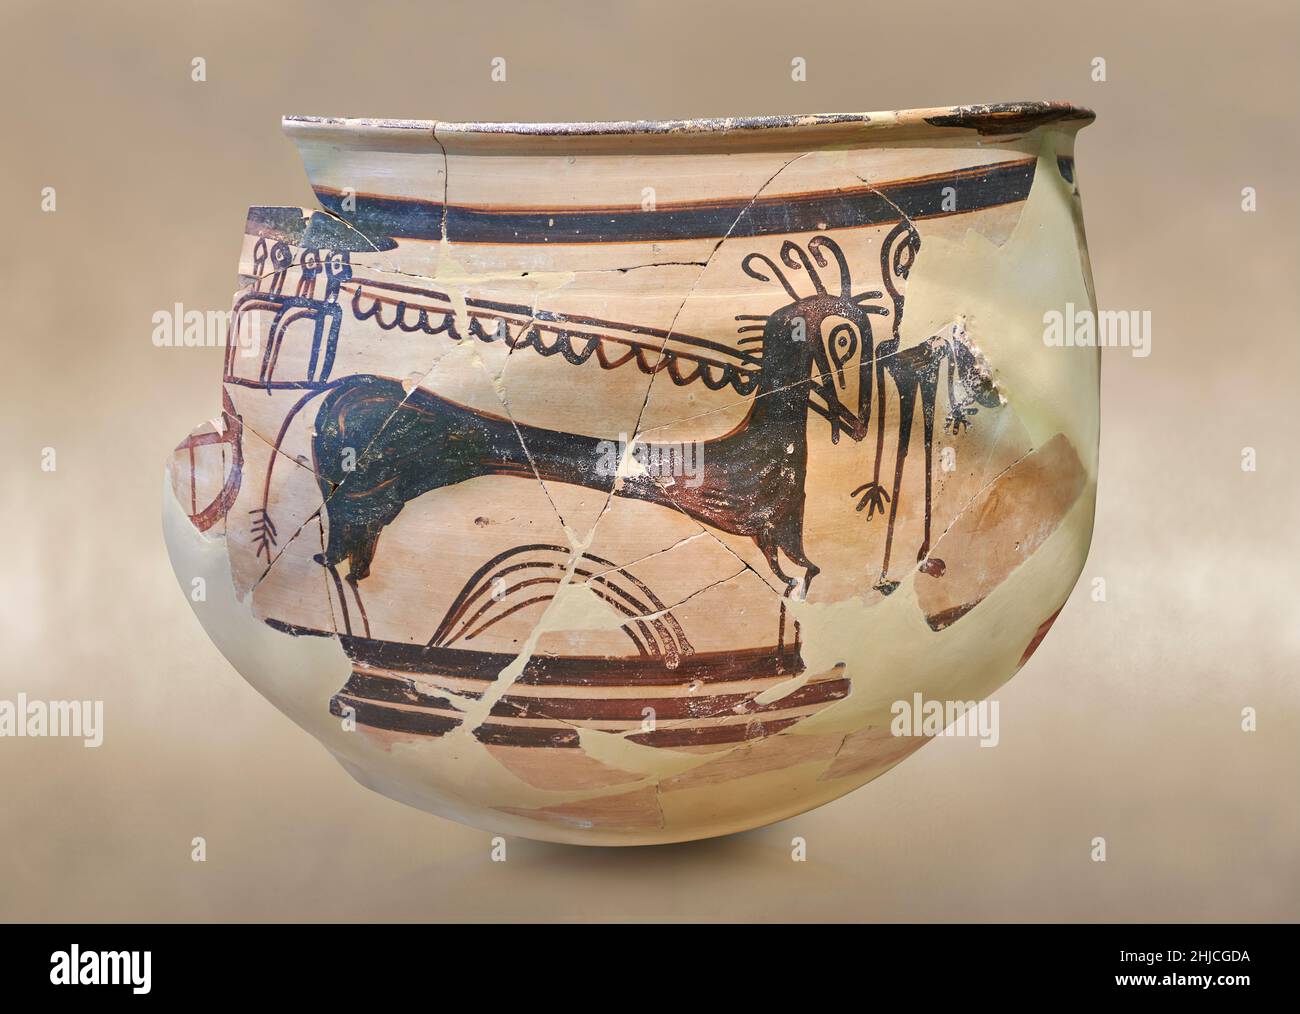 Mycenaean pottery - Krater fragment depicting a horse and chariot scene, Tiryns, 1400-1300 BC. Nafplion Archaeological Museum.  Against grey art backg Stock Photo